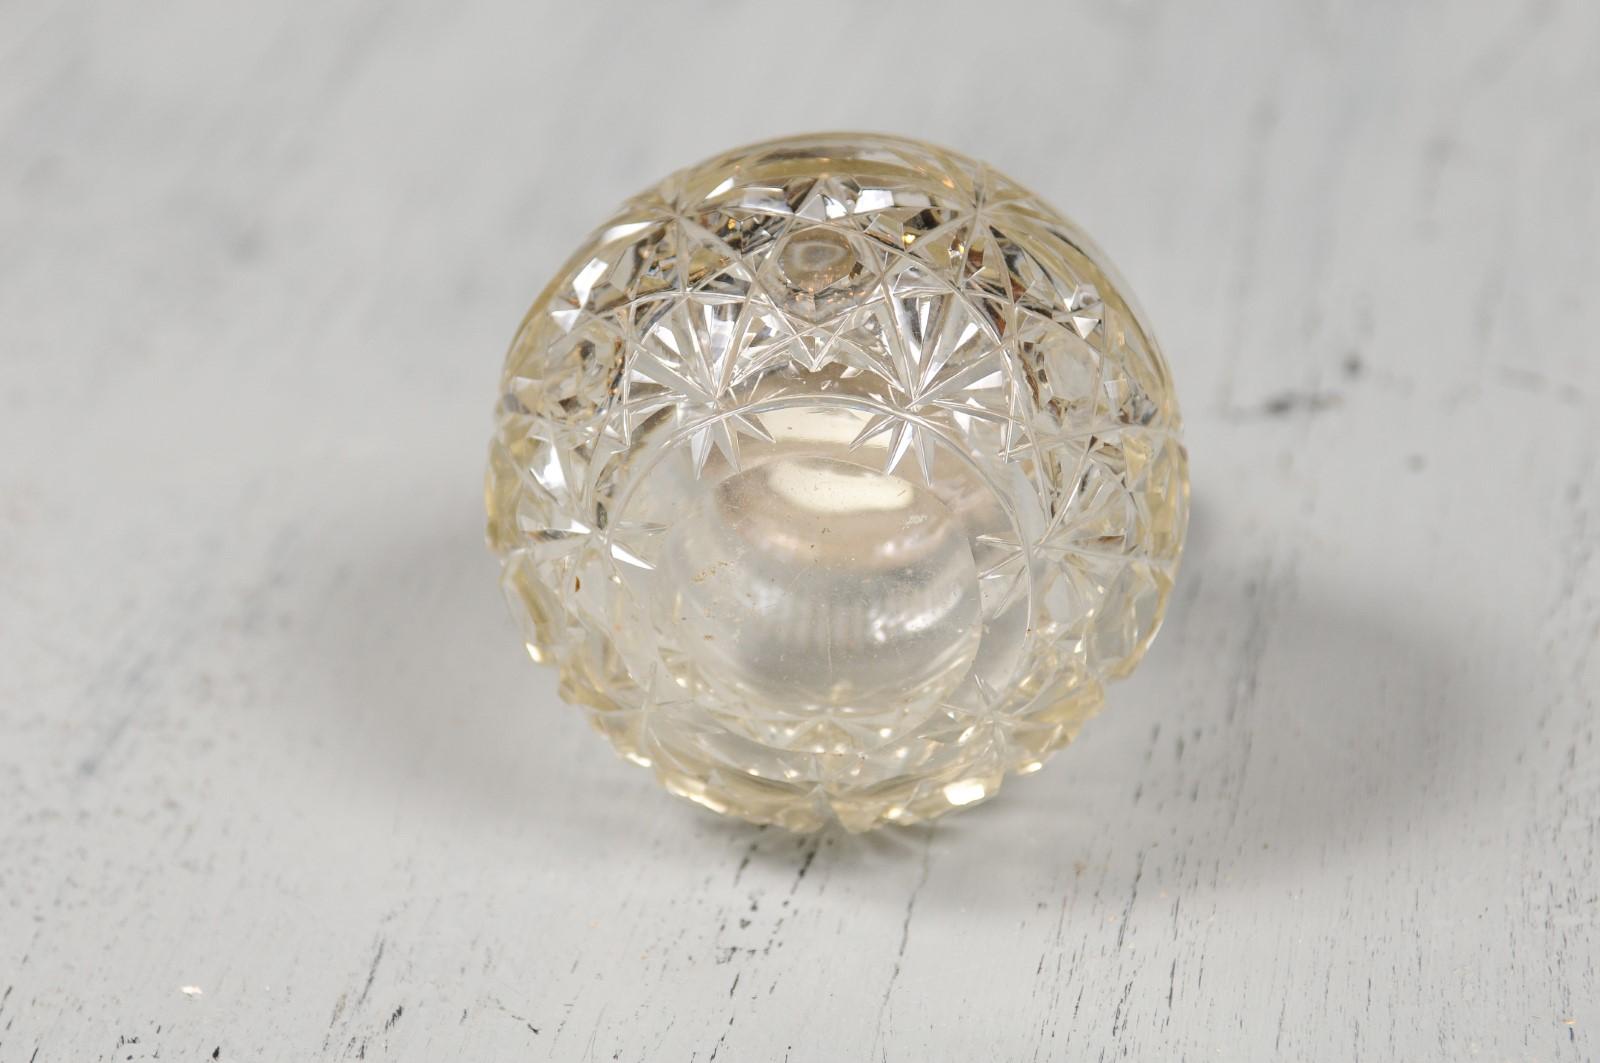 English Victorian Crystal Toiletry Bottle with Silver Lid from the 19th Century For Sale 6